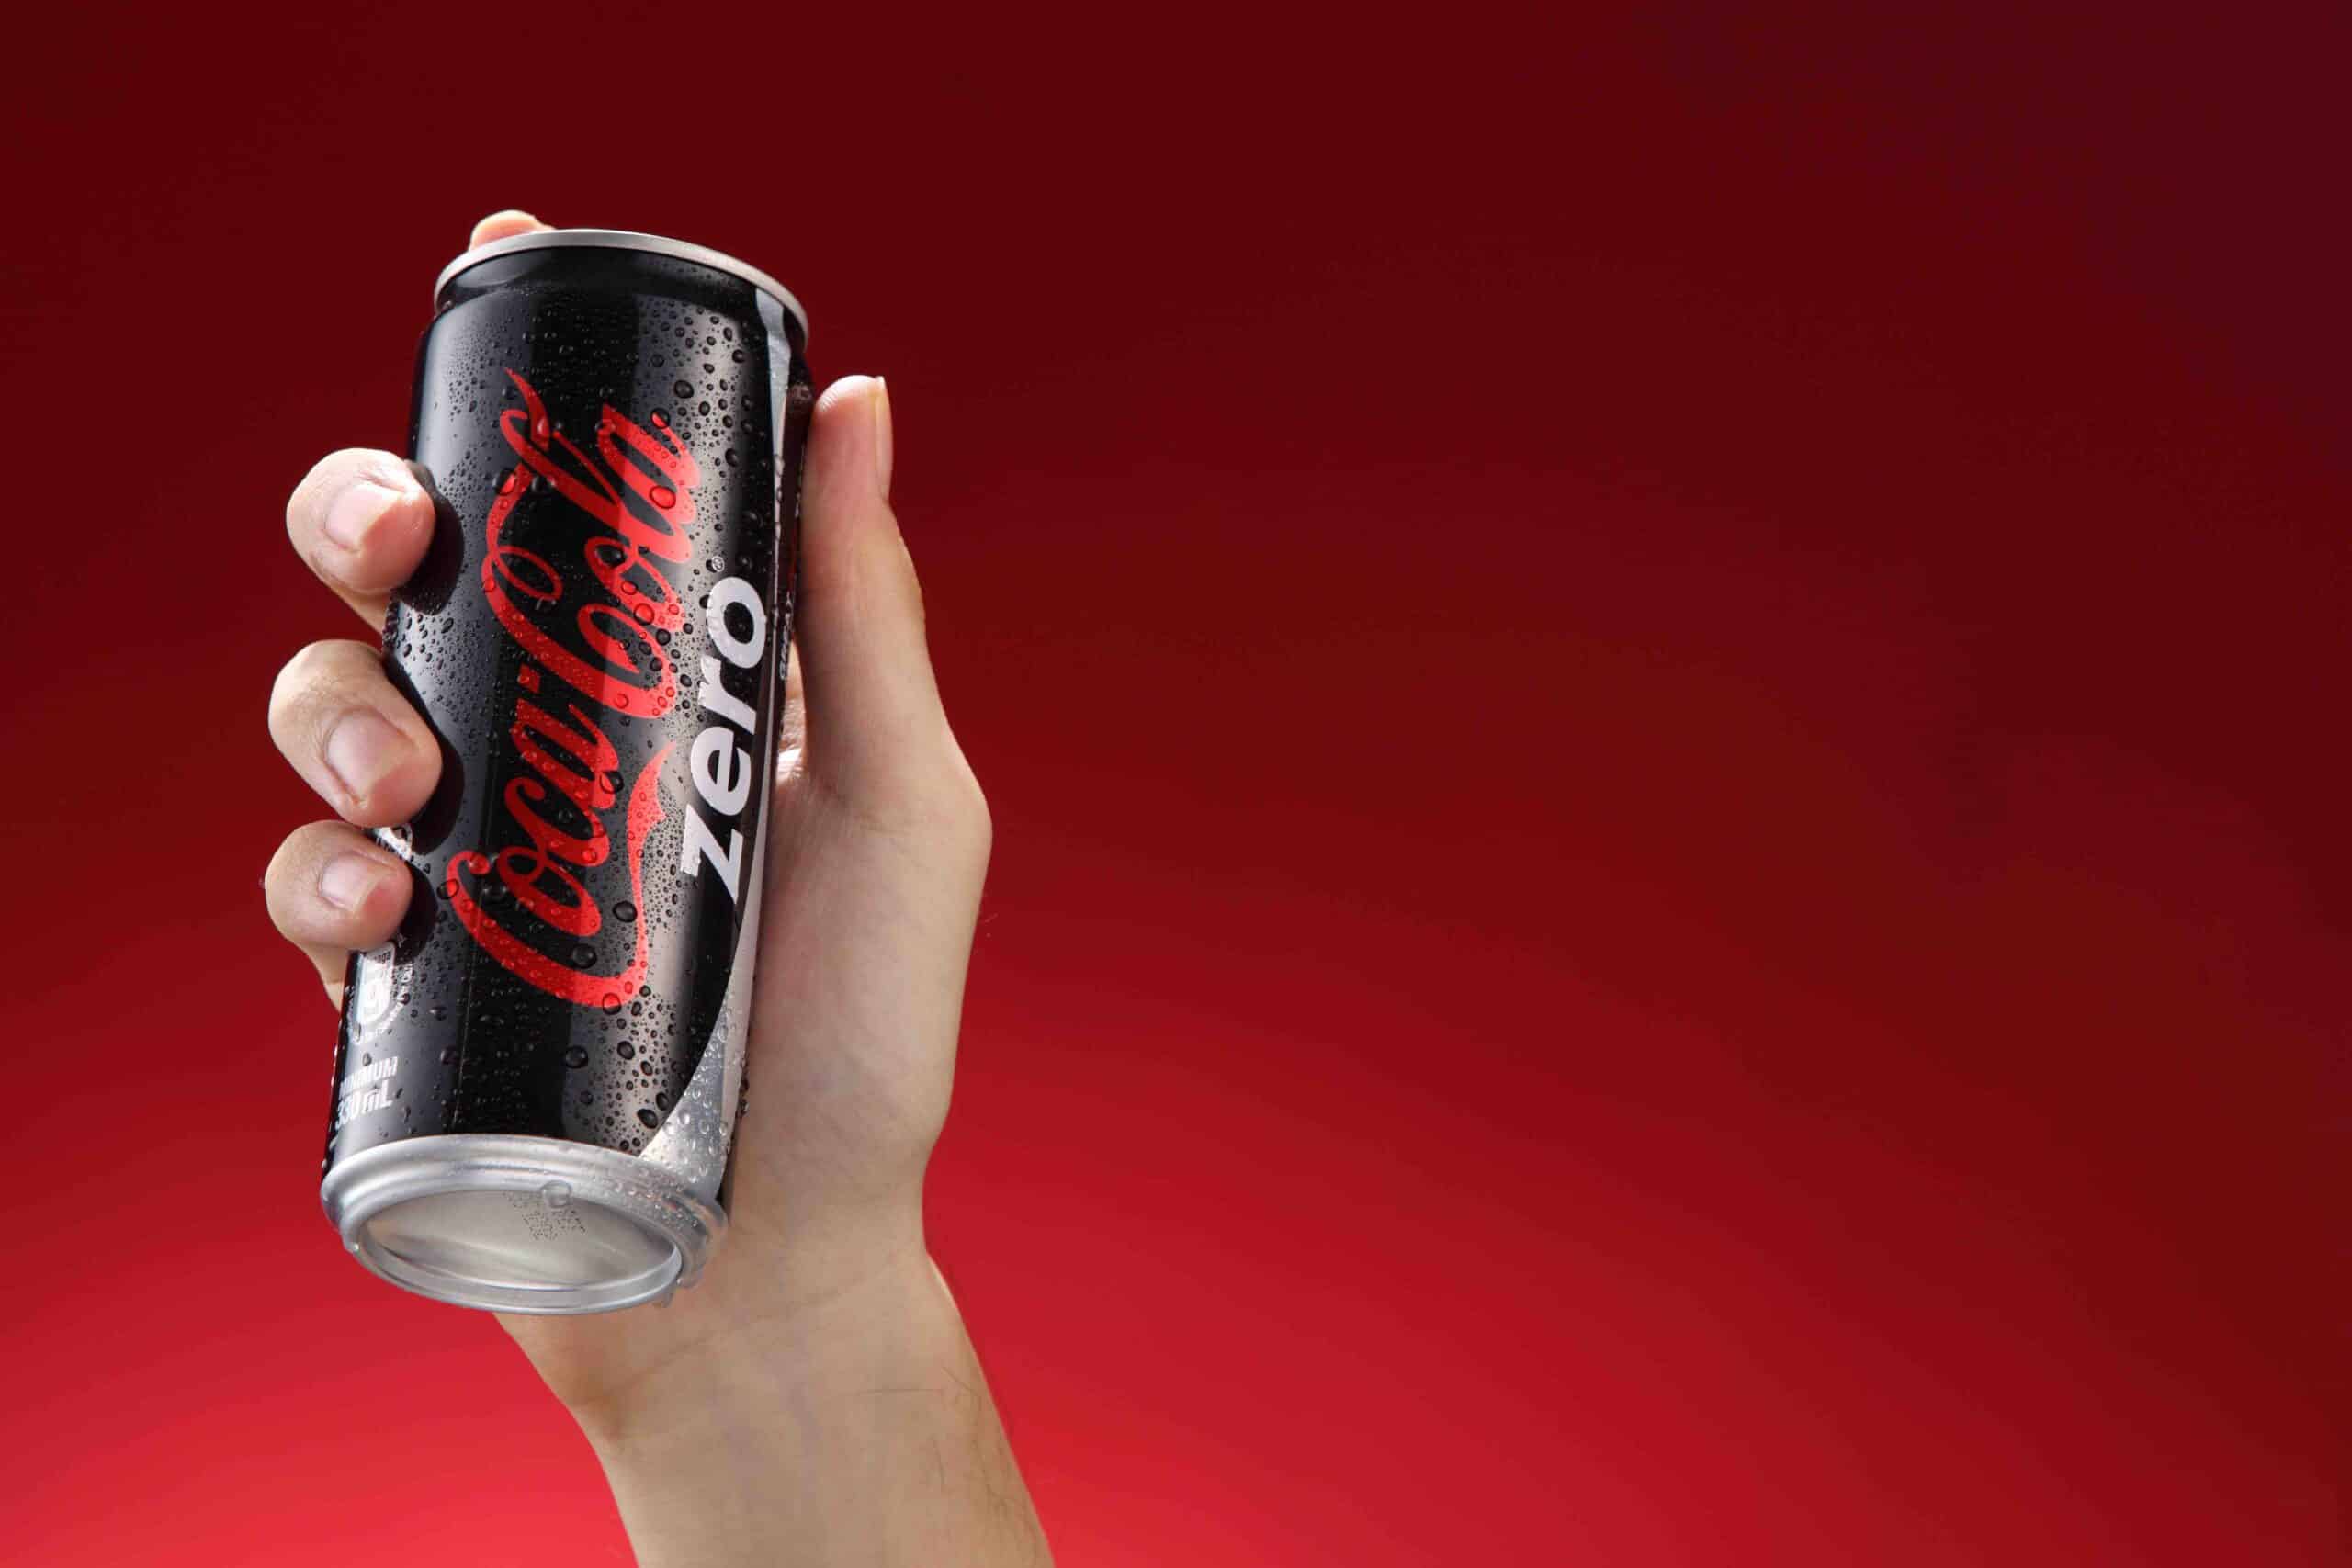  Hand hold a  can Coca-Cola Zero on red  background. Coca Cola drinks are produced and manufactured by The Coca-Cola Company.